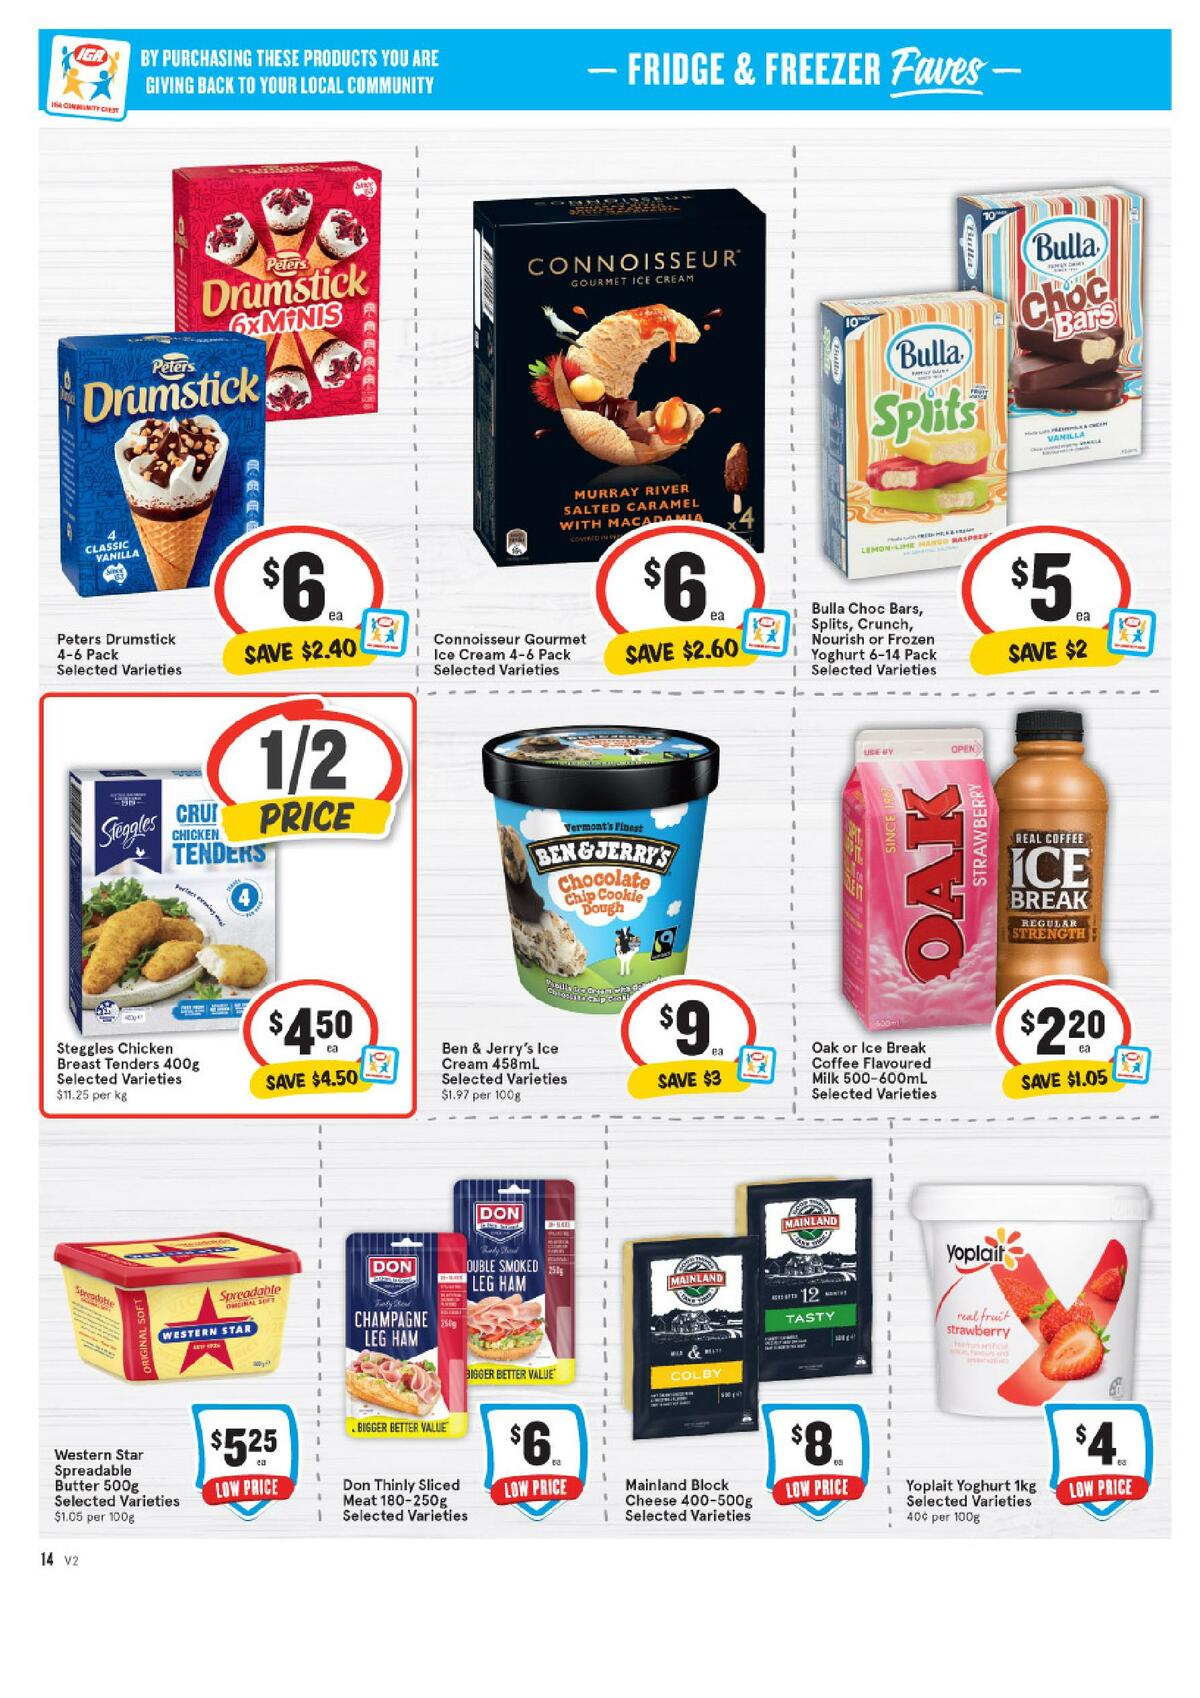 IGA Catalogues from 9 June